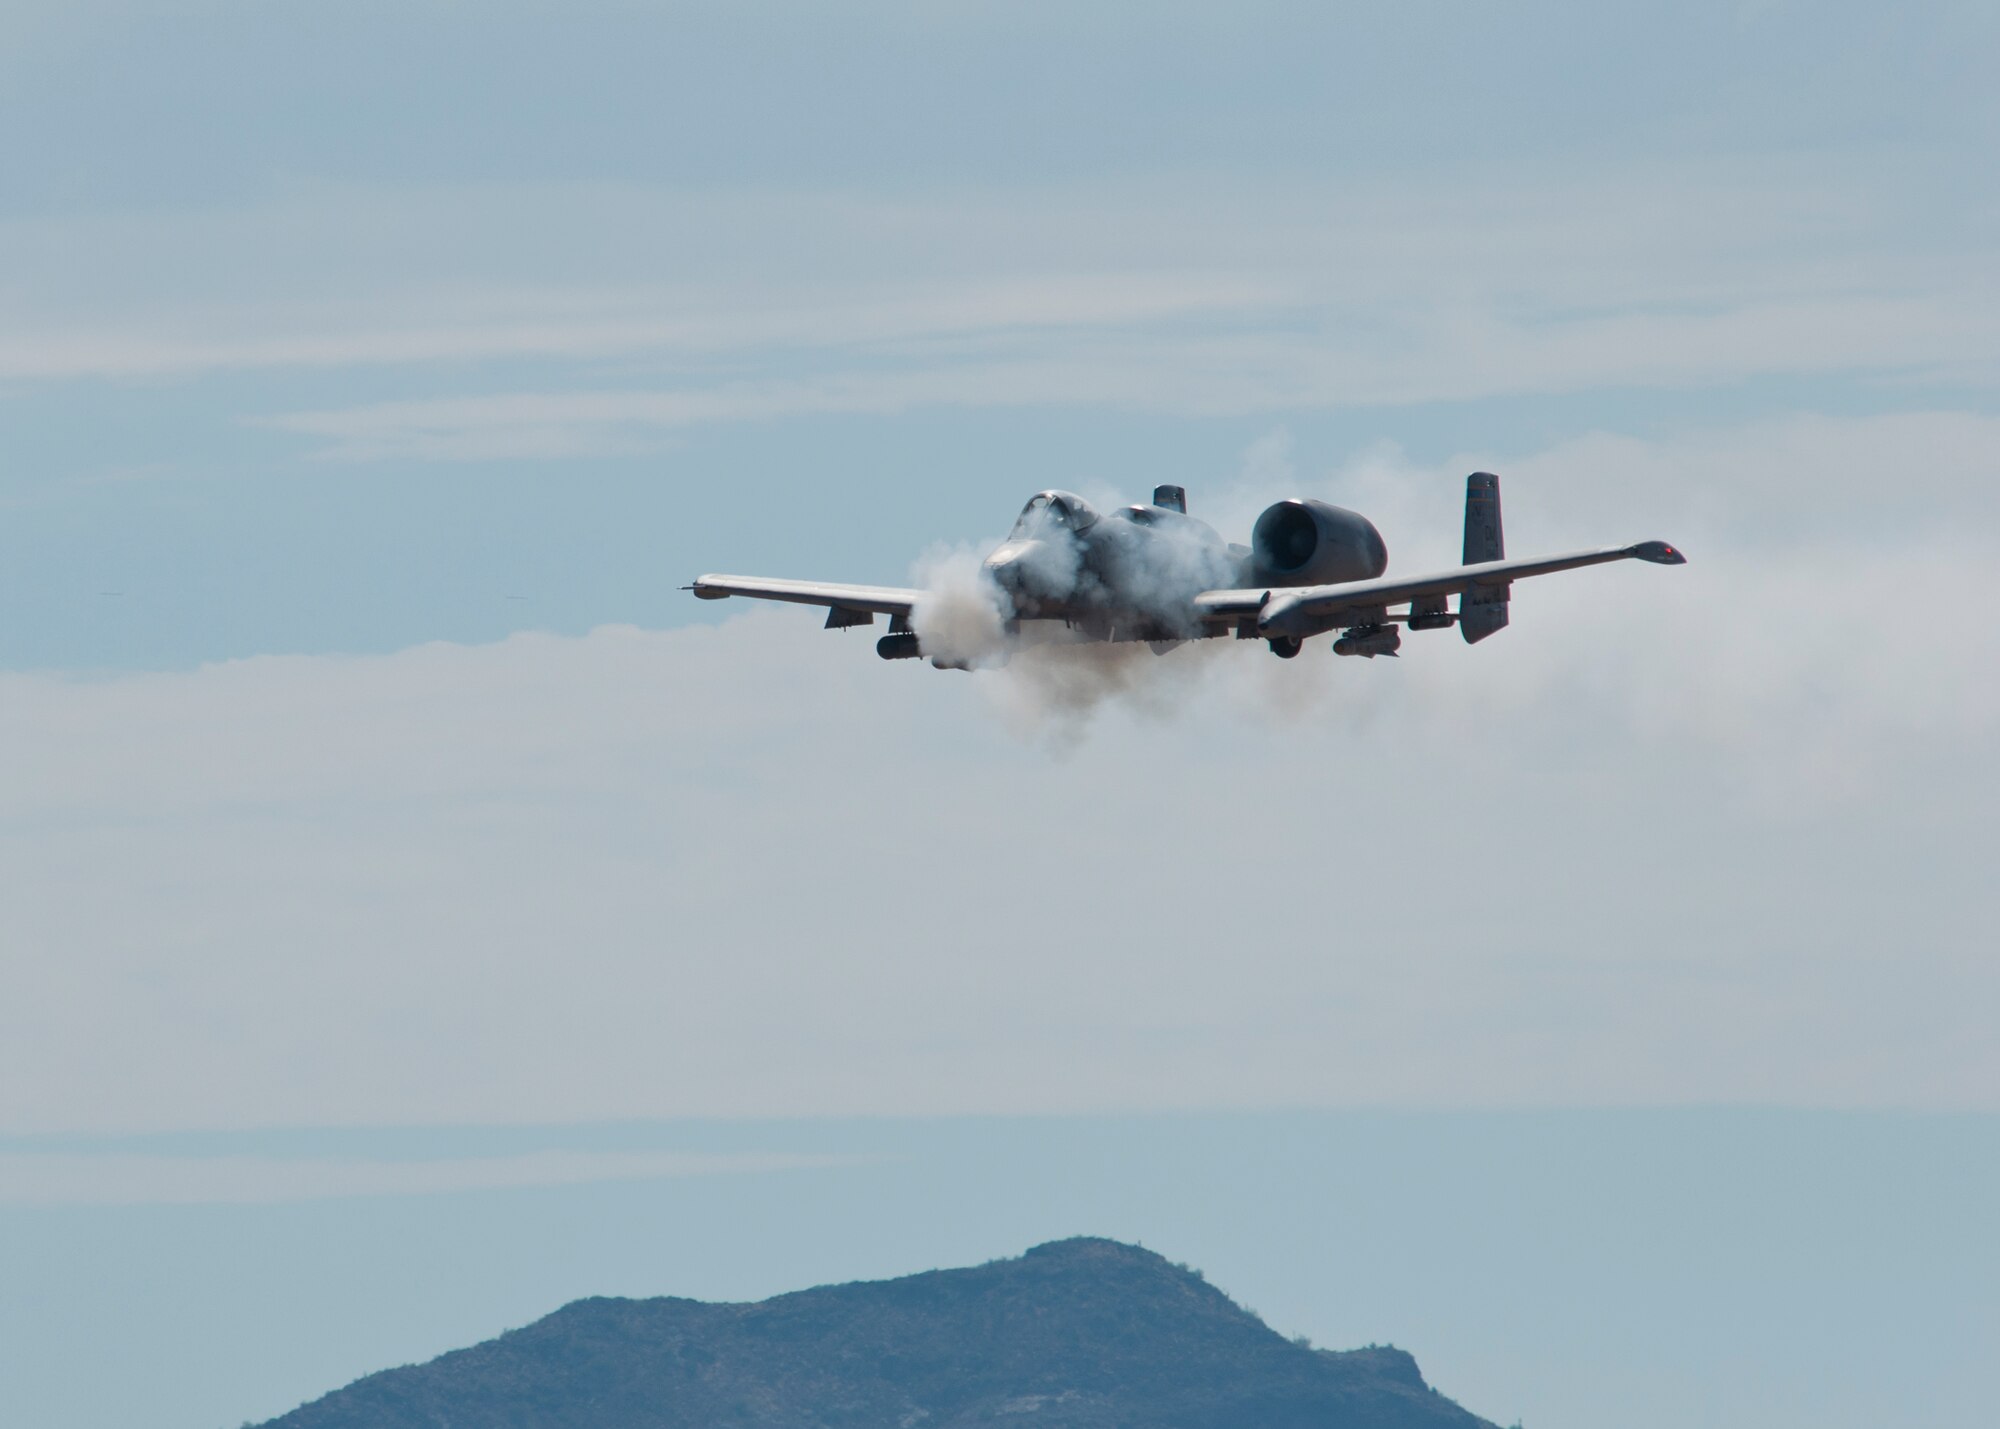 An A-10 Thunderbolt II from Davis-Monthan Air Force Base strafes during the 2014 Hawgsmoke competition July 10, 2014, at the Barry M. Goldwater Range II in Tucson, Ariz. Hawgsmoke is a biennial worldwide A-10 bombing, missile, and tactical gunnery competition. Four-ship teams of aircraft and pilots from A-10 units around the world compete for the honor of being the best in ground attack and target destruction. (U.S. Air Force photo/)